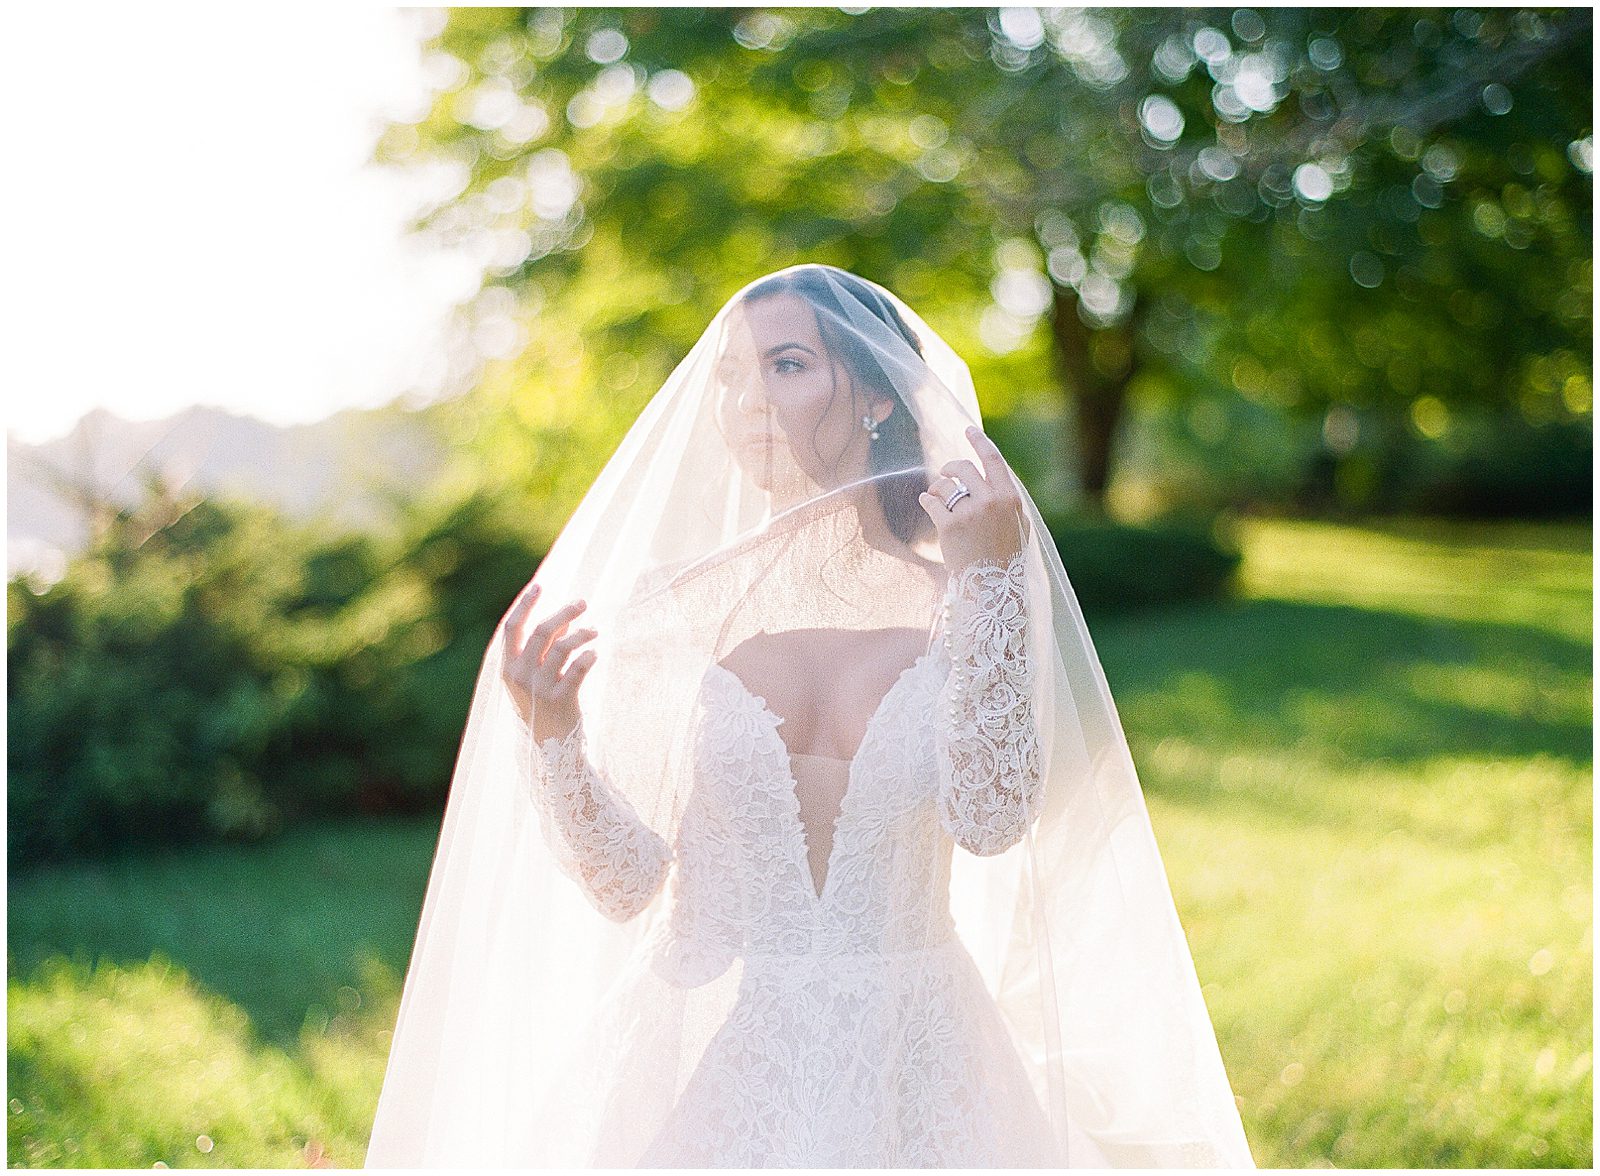 Bride With Veil Over Her Head Photo